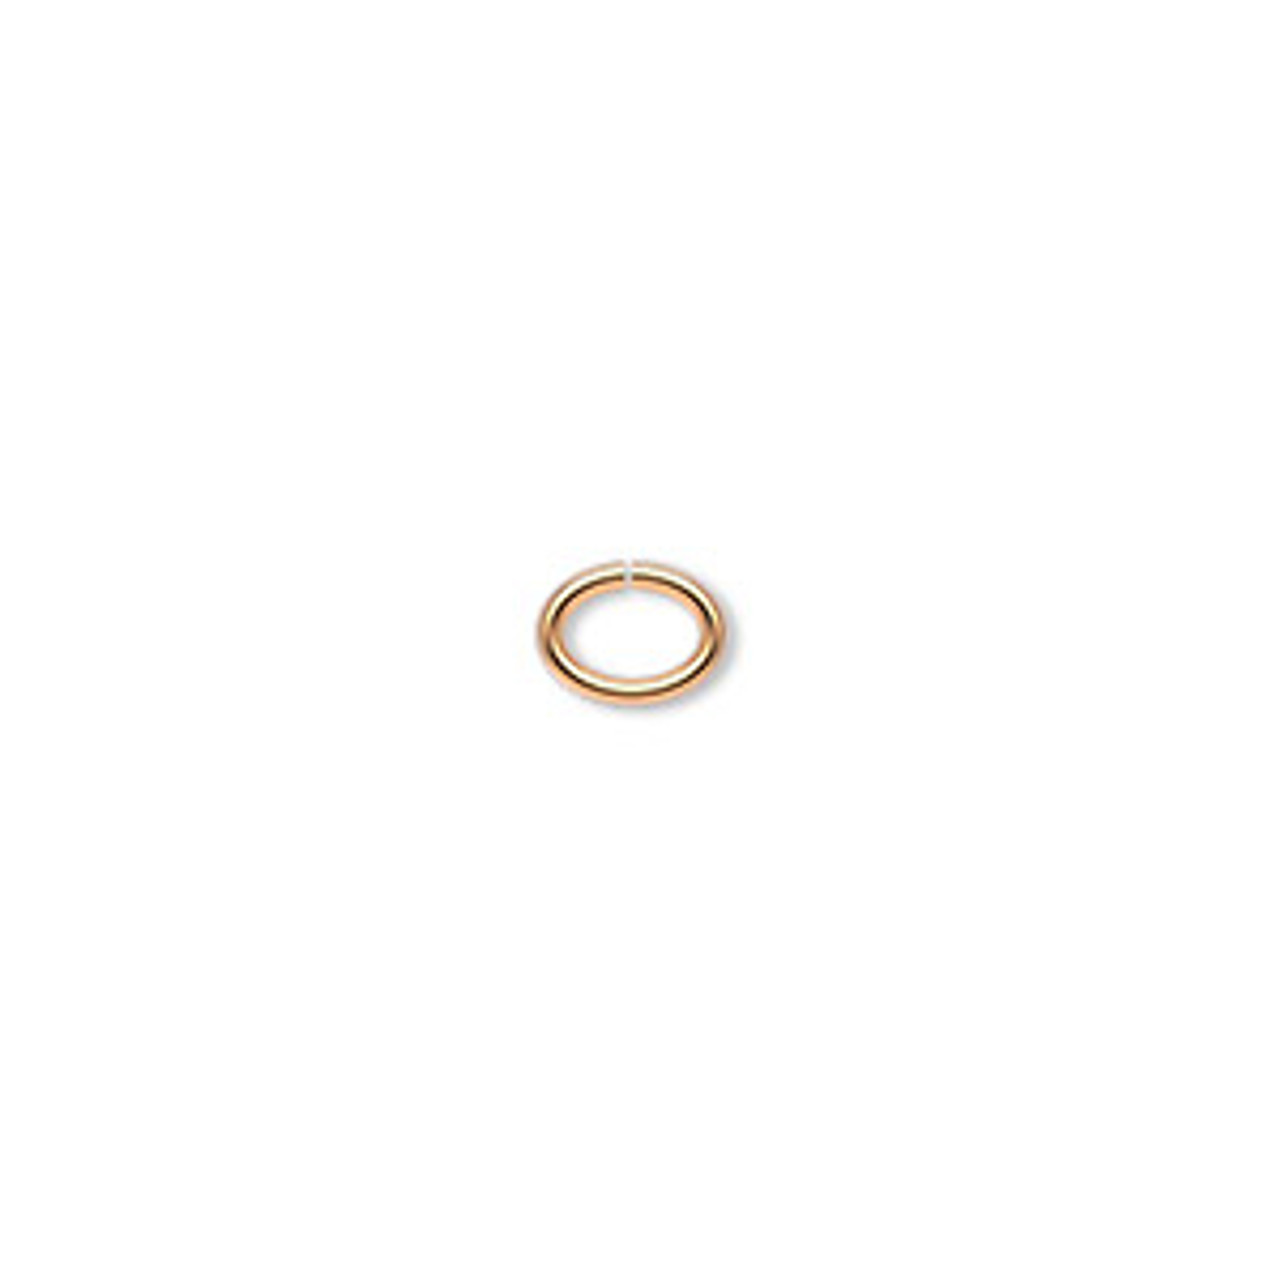 6.5x5mm Gold Plated Oval Jump Rings (100 Pack) 